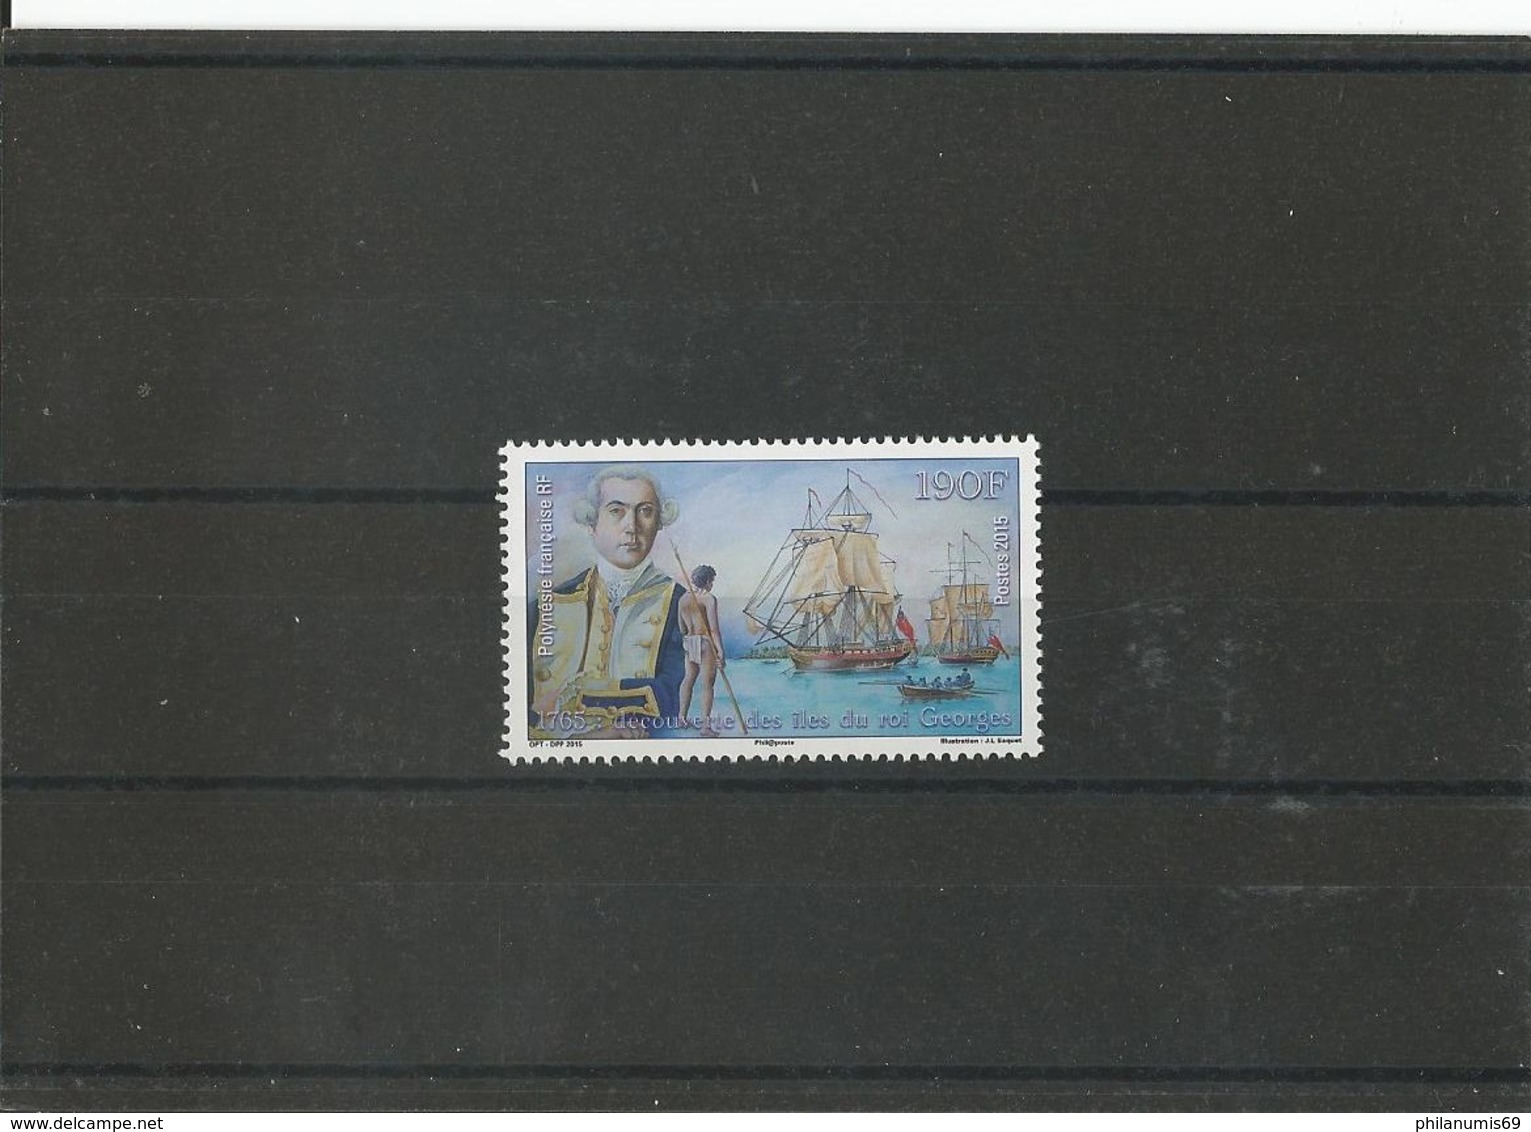 POLYNESIE 2015 - YT 1085 - NEUF SANS CHARNIERE ** (MNH) GOMME D'ORIGINE LUXE - Unused Stamps